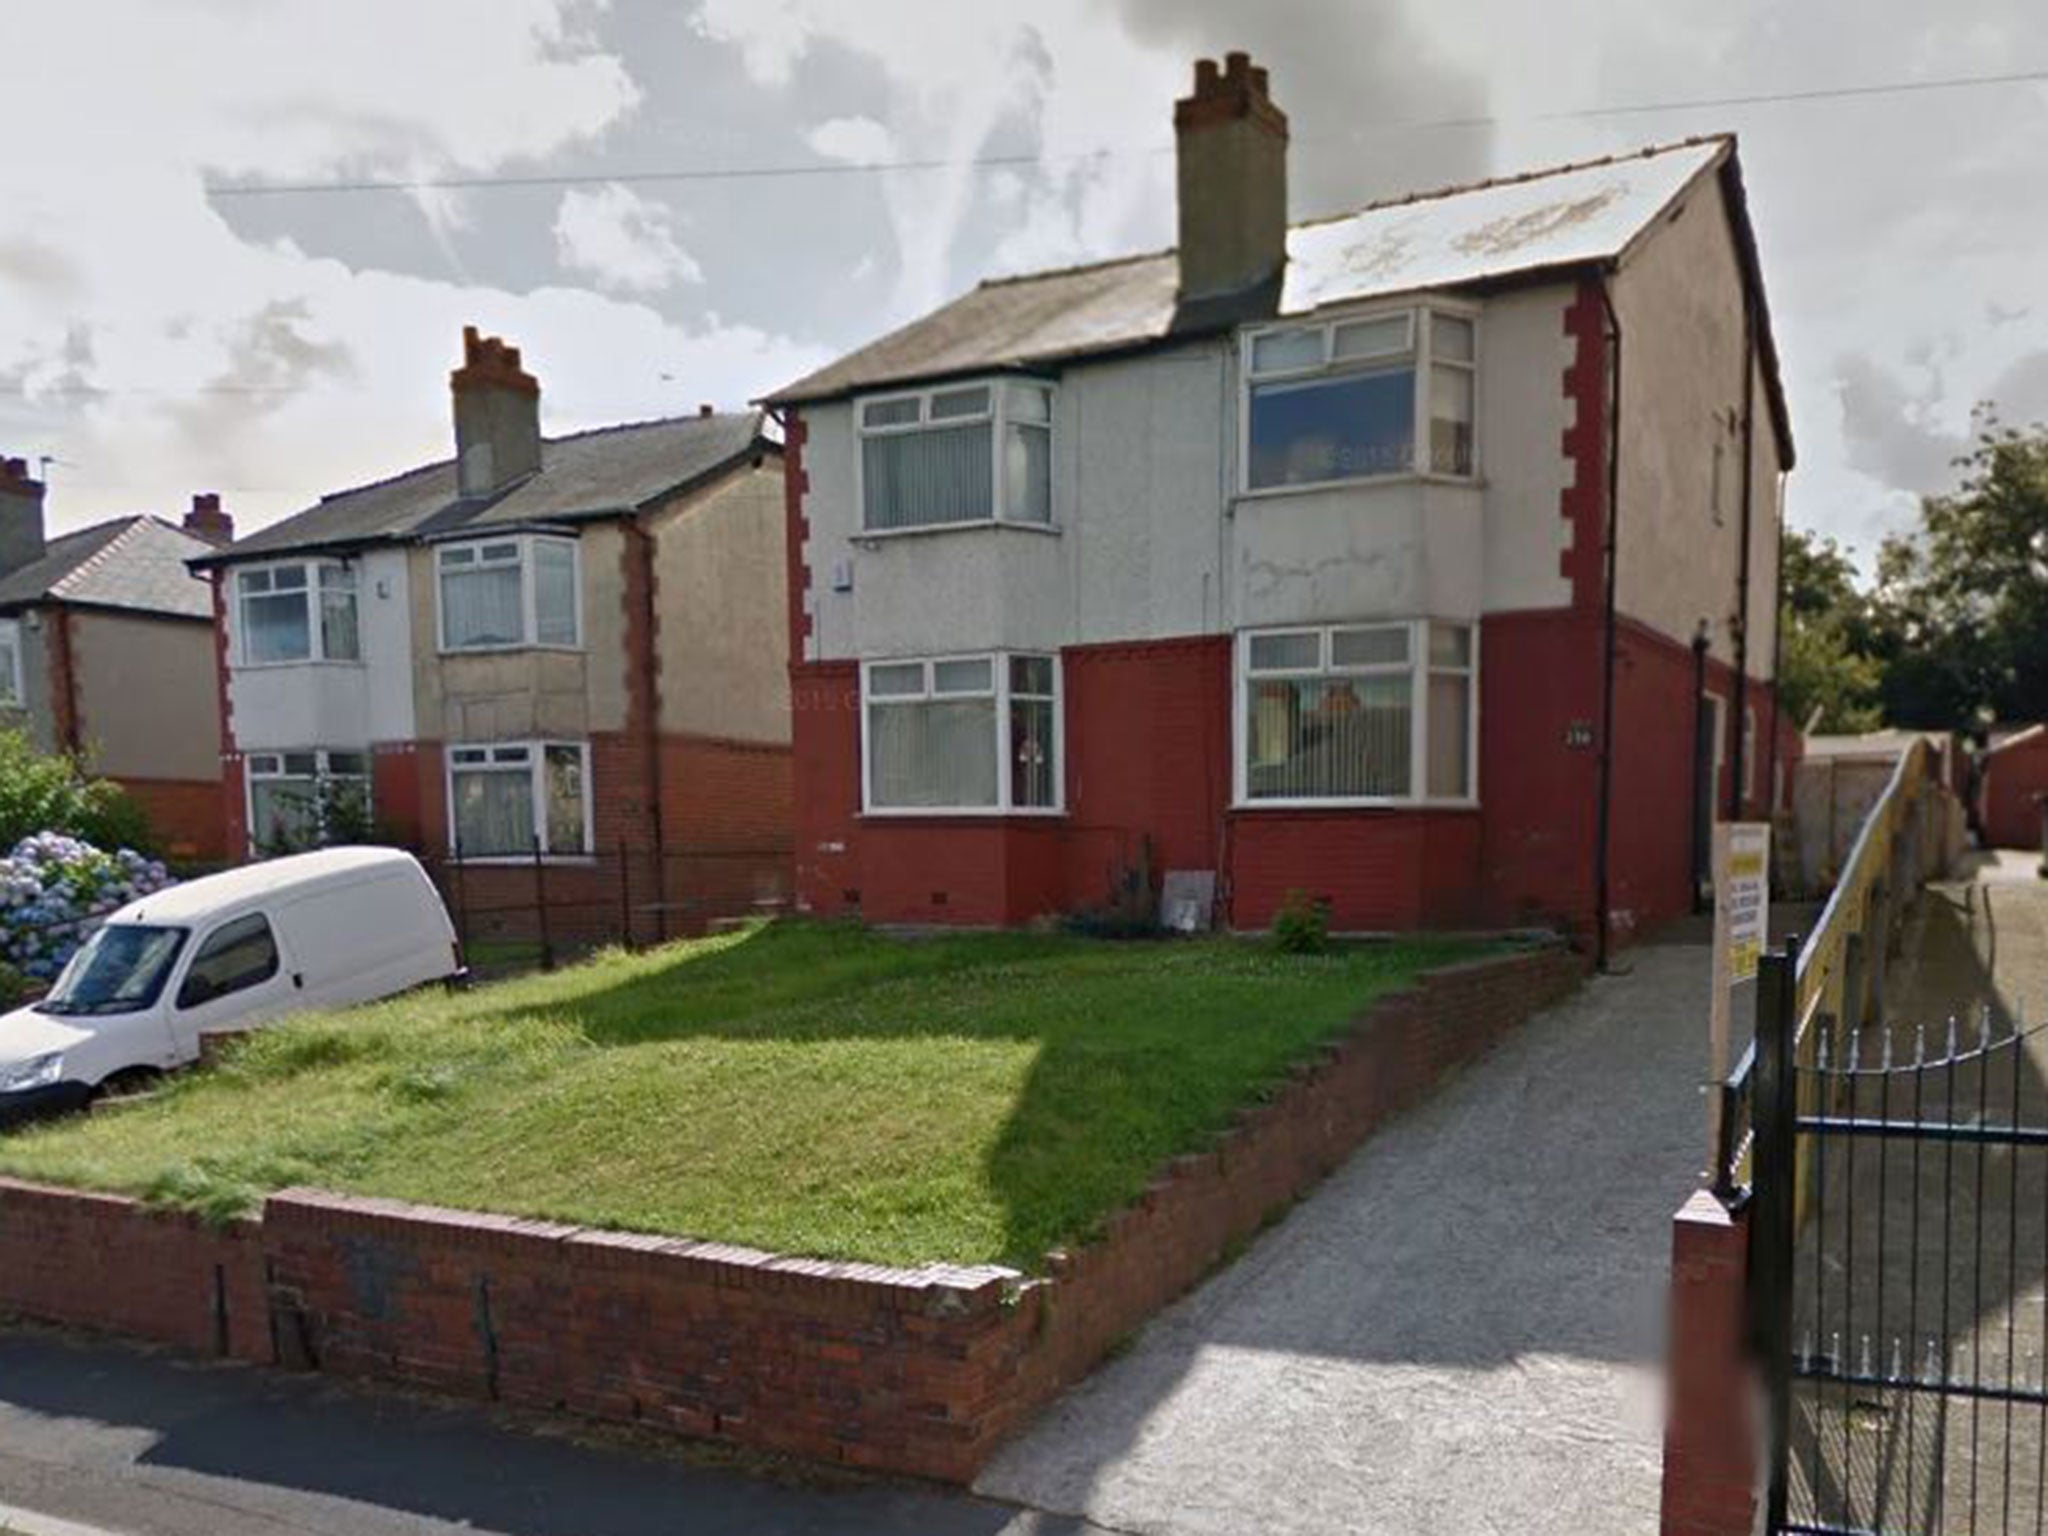 Firefighters were called to a house in Alder Street, Fartown, just after 2pm on Saturday